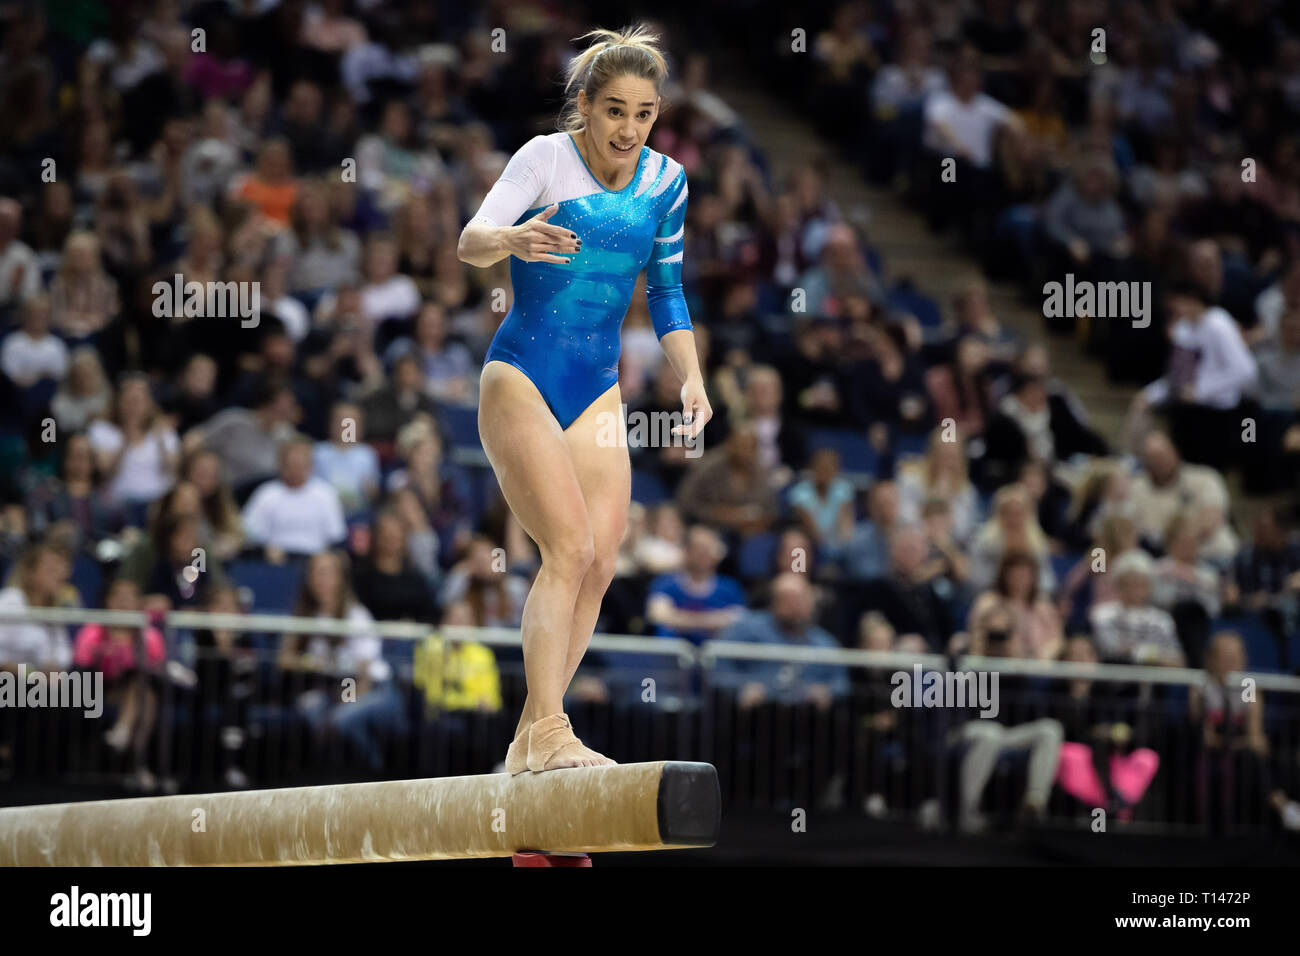 London, UK. 23rd March, 2019. Ayelen Tarabini of Argentina performs on the Beam during the Matchroom Multisport presents the 2019 Superstars of Gymnastics at The O2 Arena on Saturday, 23 March 2019. LONDON ENGLAND. Credit: Taka G Wu/Alamy News Stock Photo